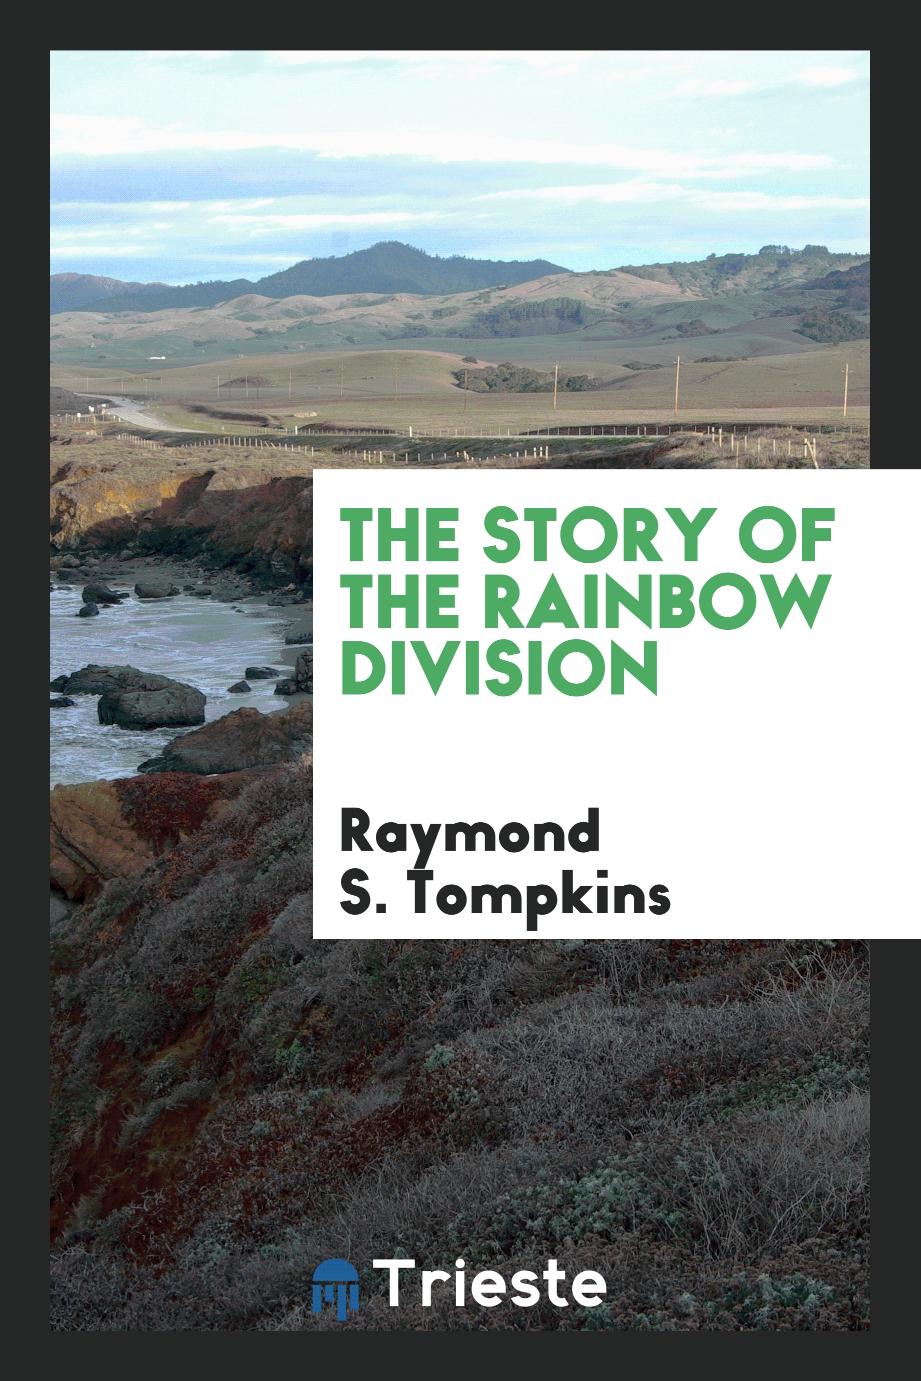 The story of the Rainbow division